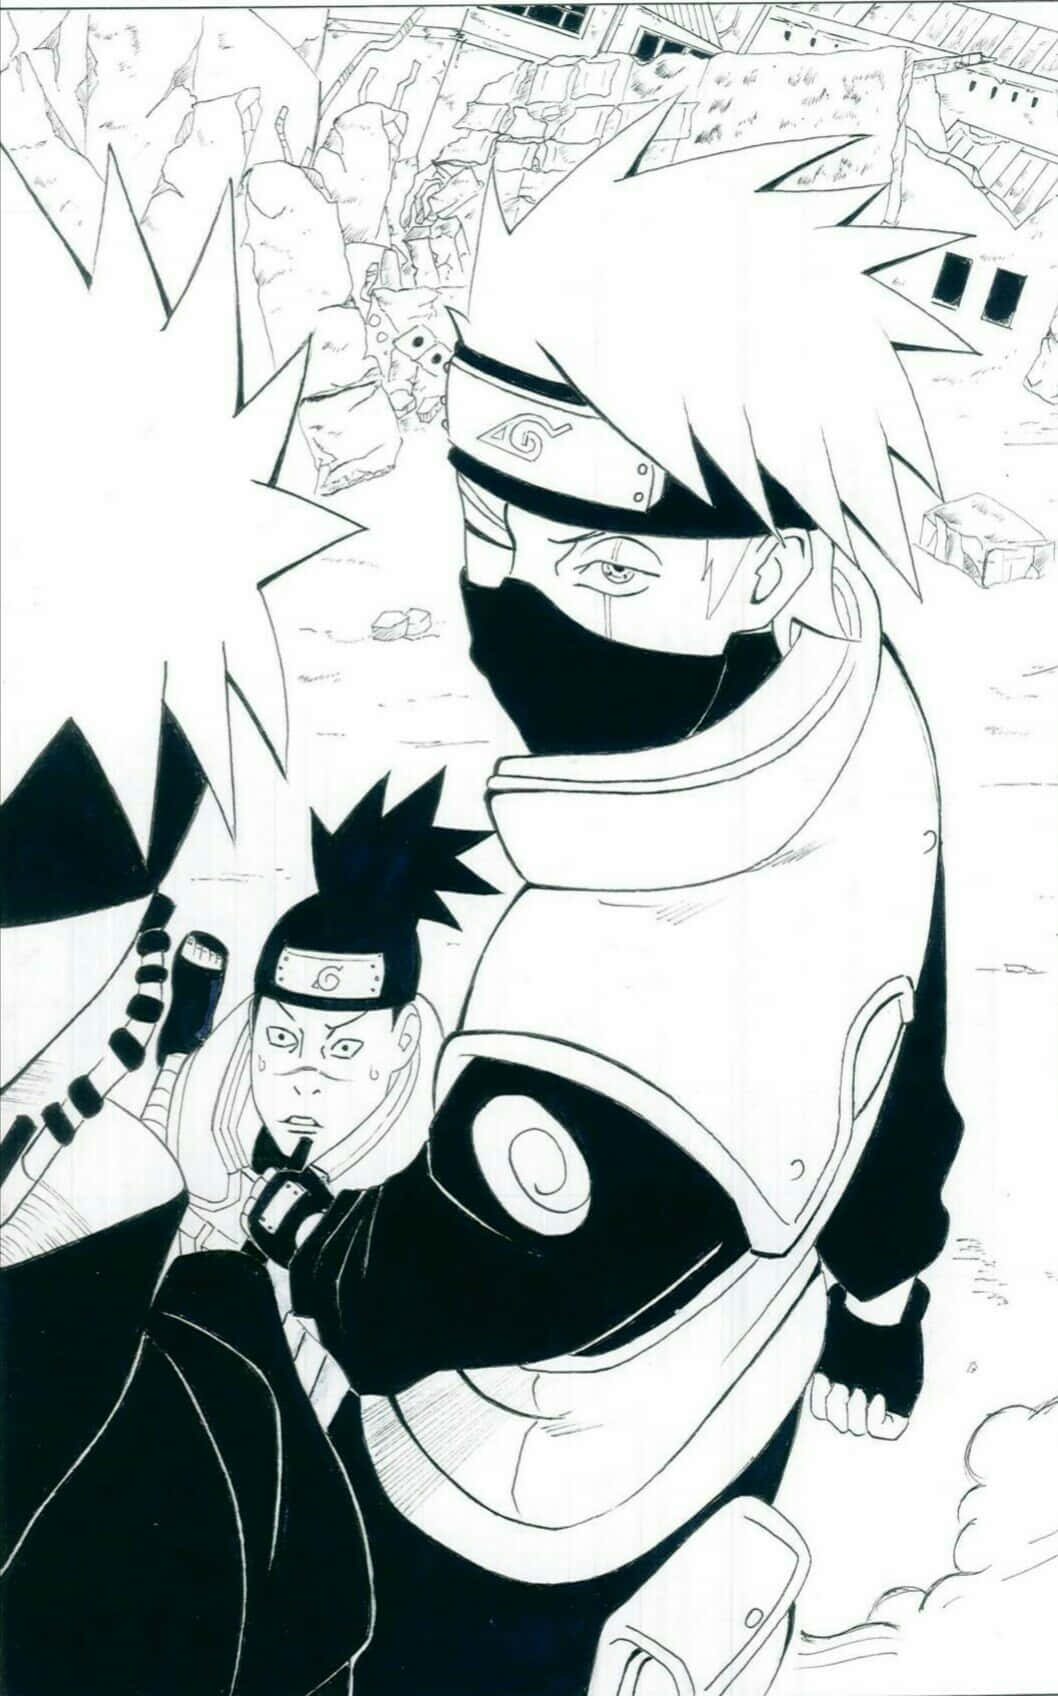 Kakashi Hatake and Pain confront each other in an intense battle Wallpaper